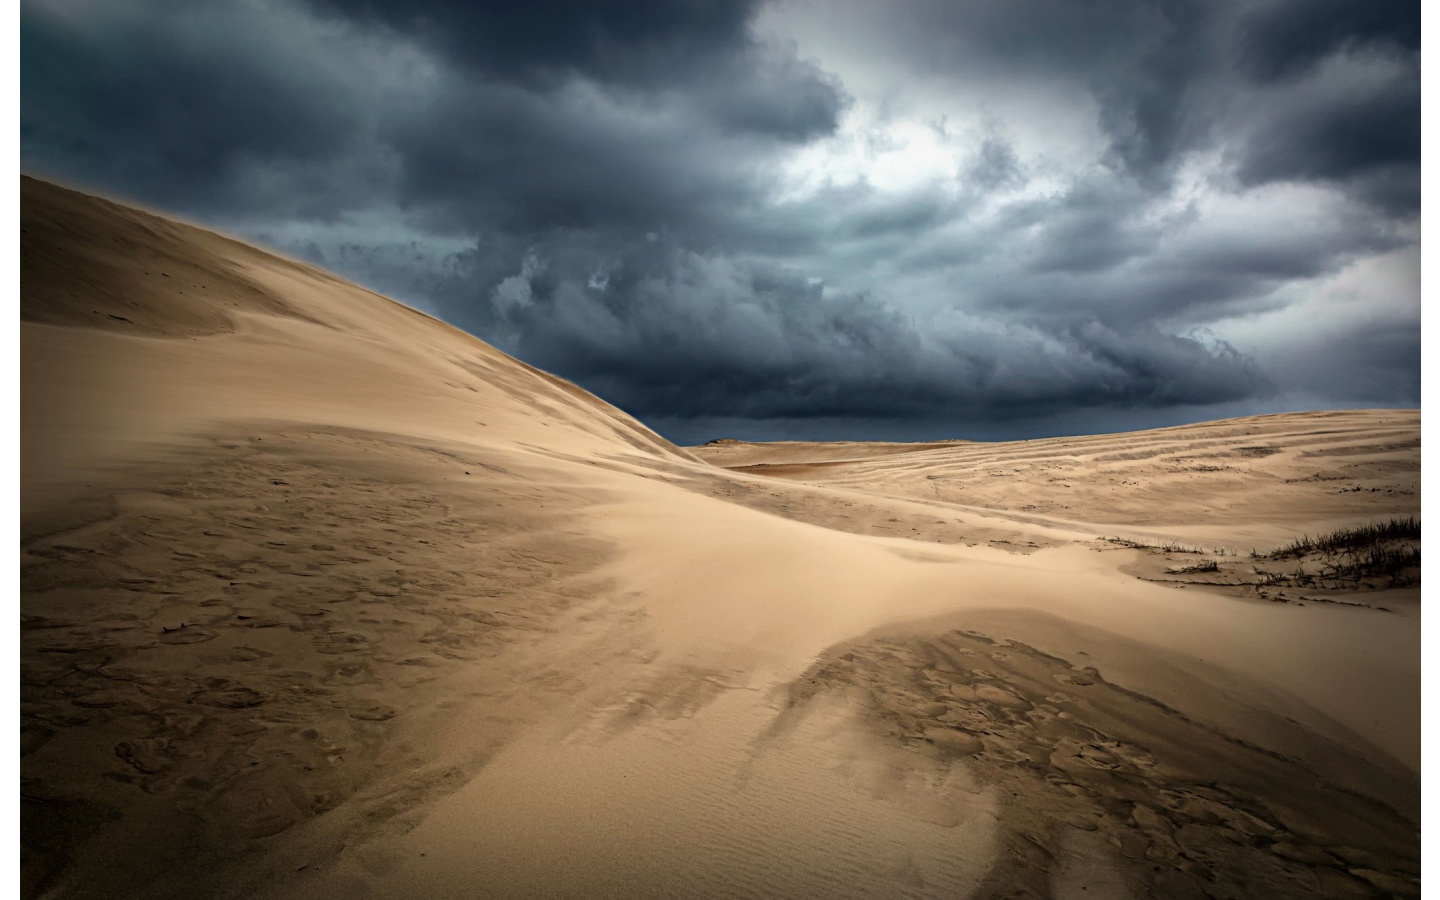 Stormy Clouds Above The Sand Dunes